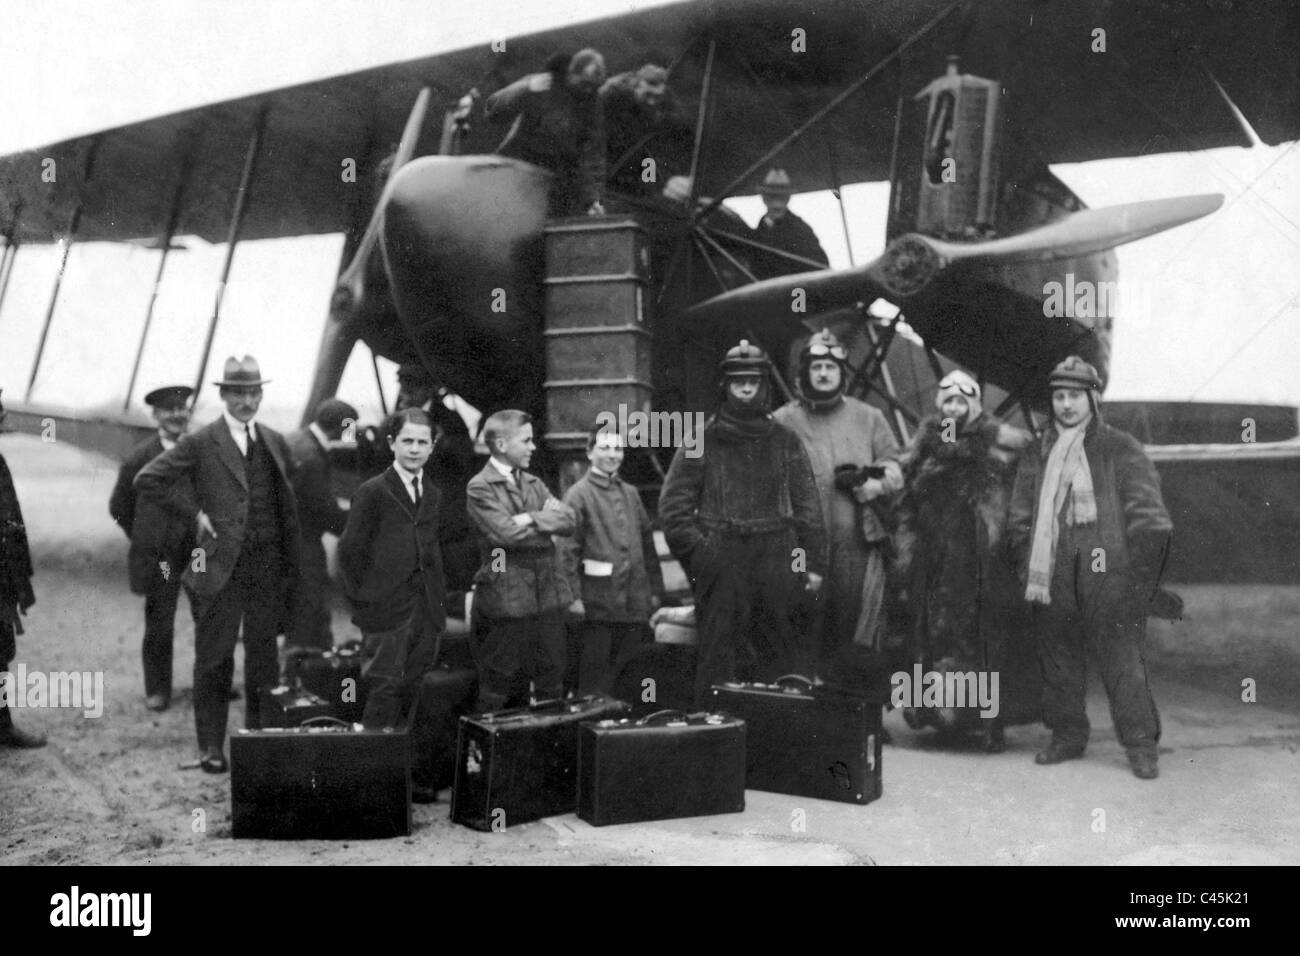 Passengers and luggage at an airplane, 1919 Stock Photo